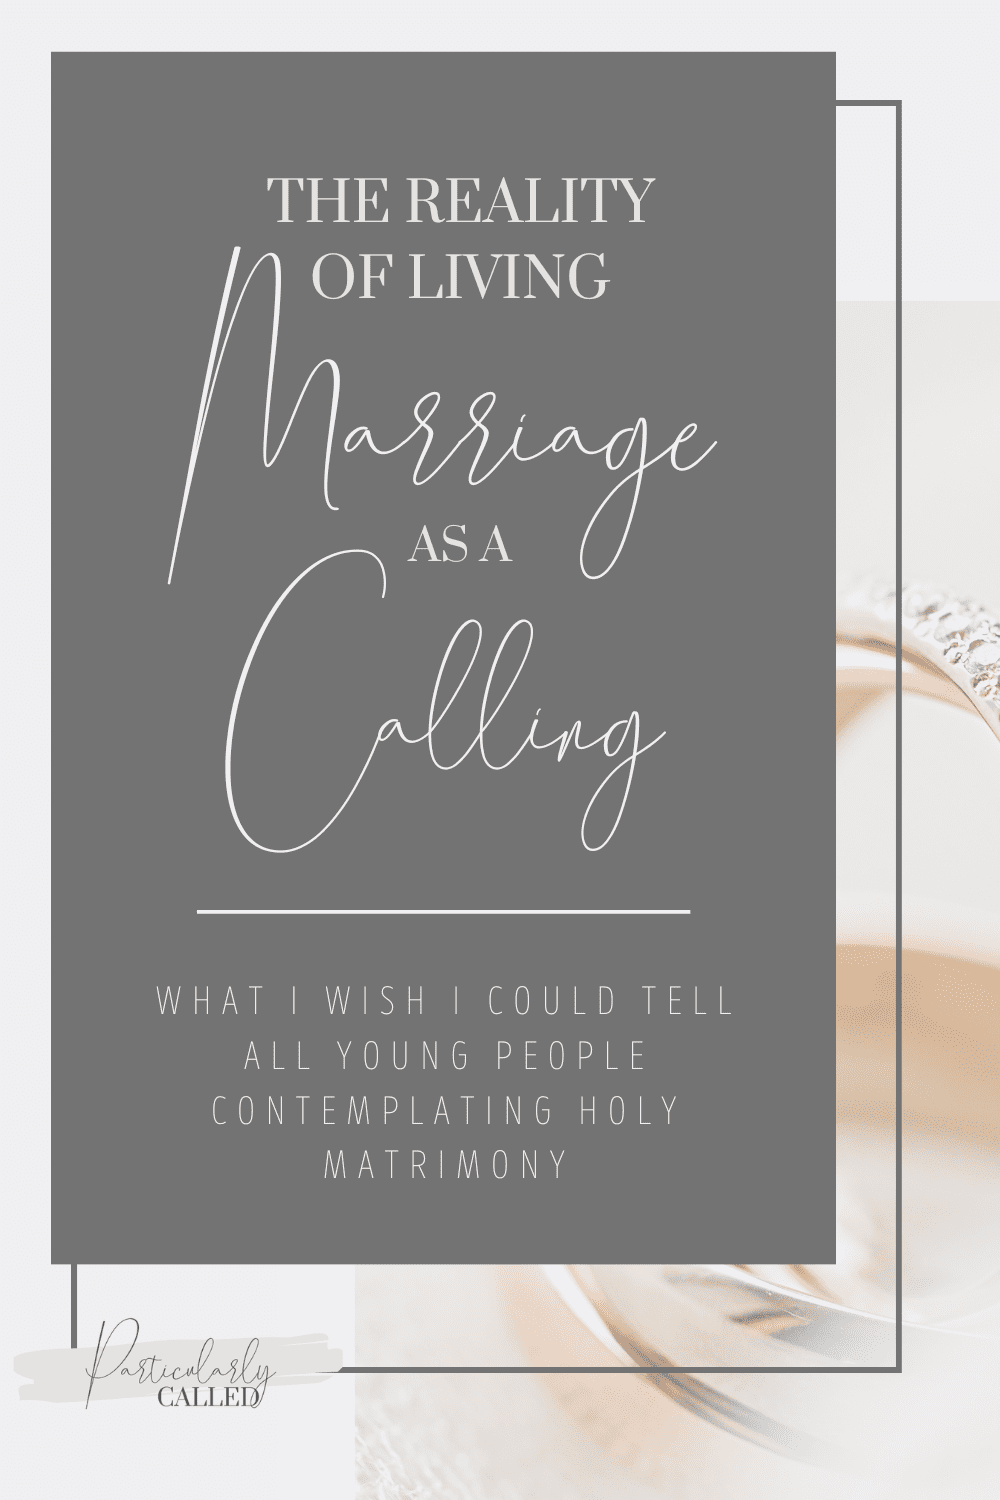 The Reality of Living Marriage as a Calling